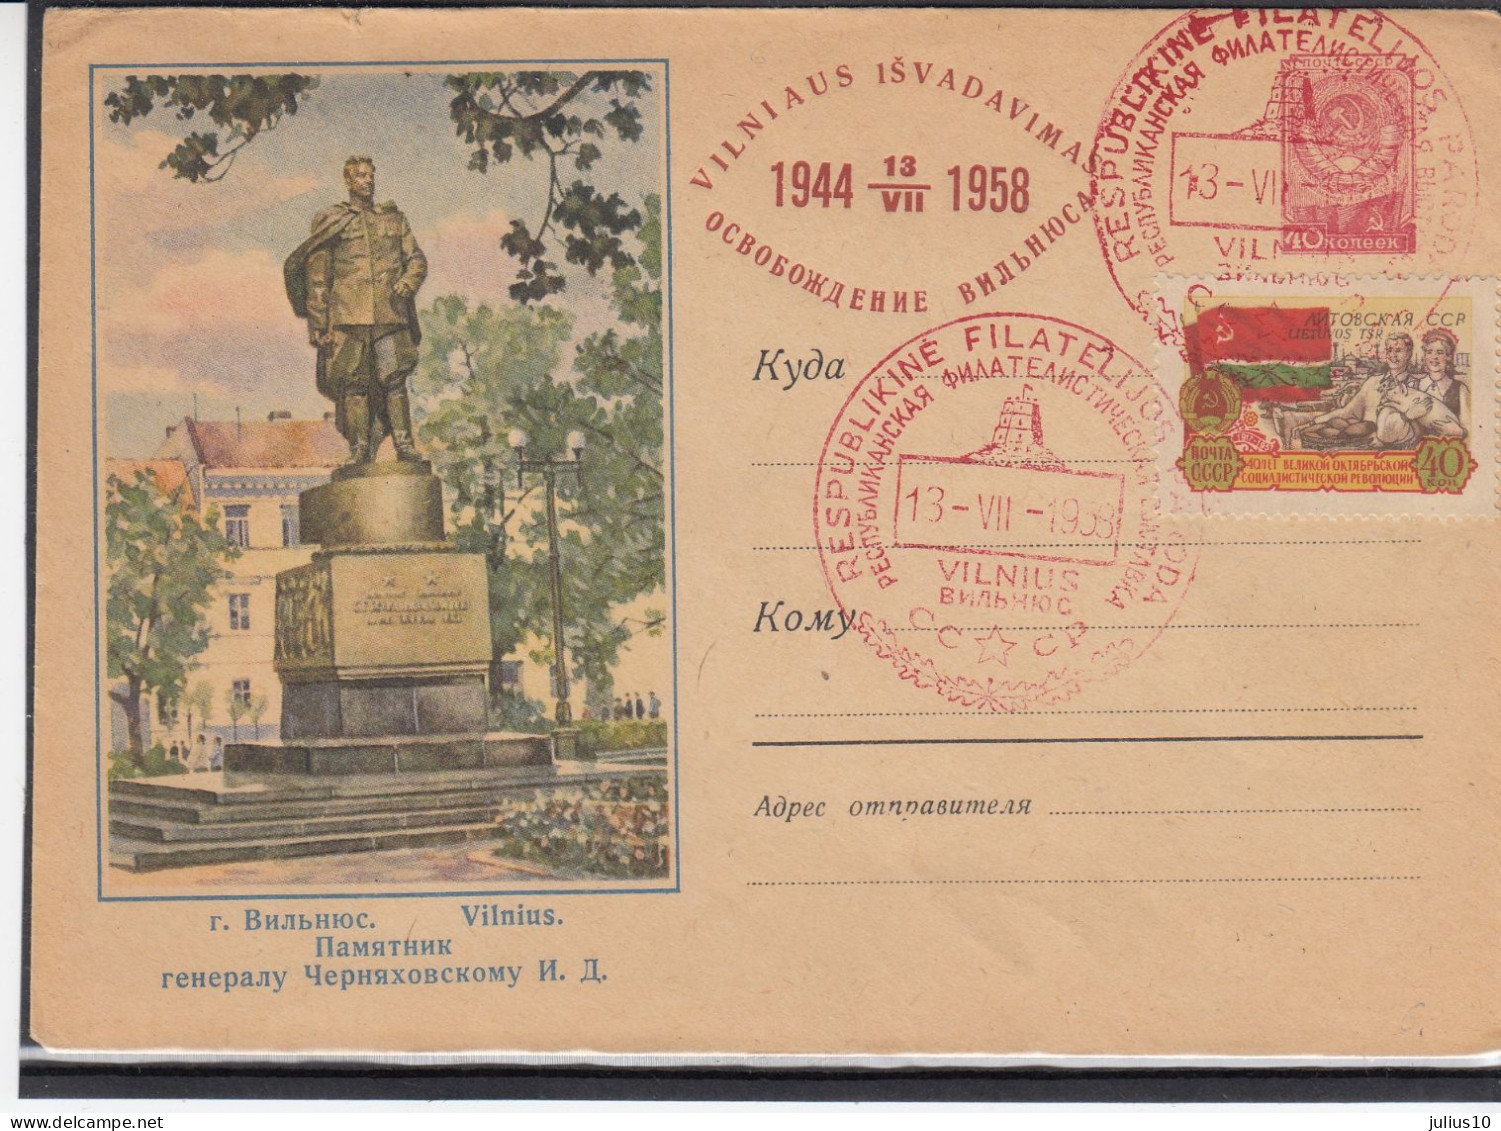 LITHUANIA (USSR) 1958 Cover Zhernechovky Monument Vilnius  #LTV2 - Lithuania